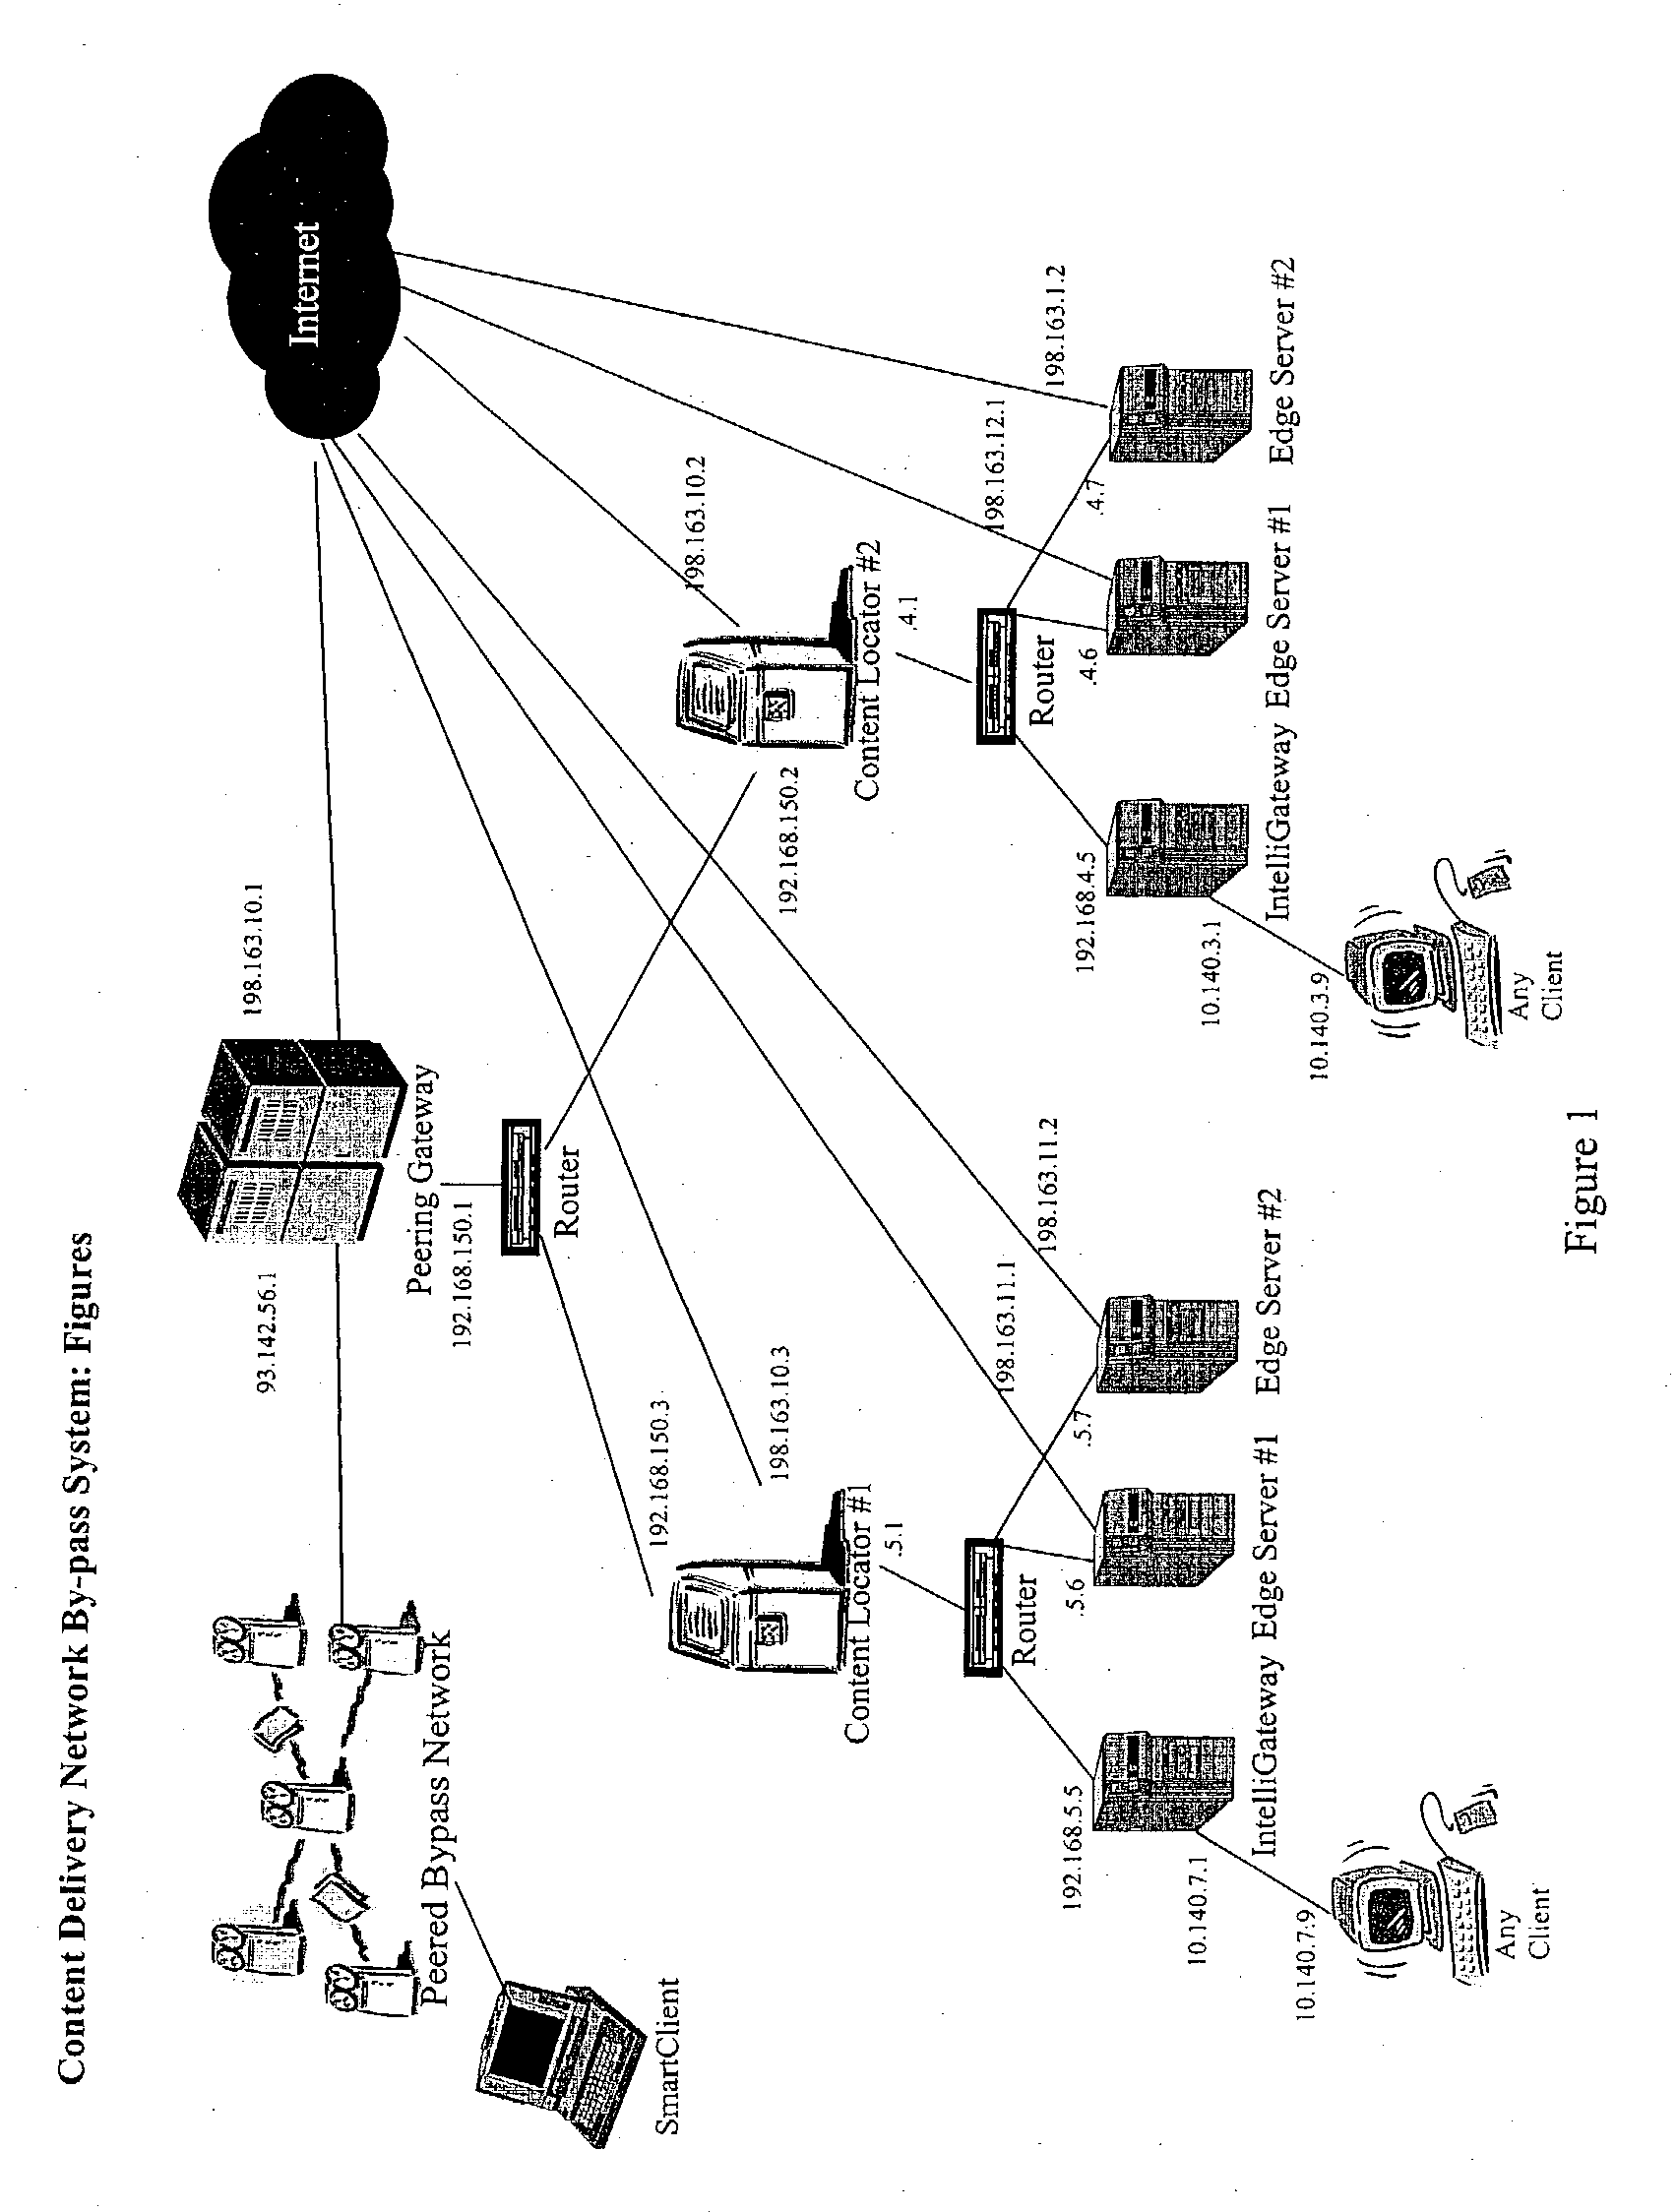 Content delivery network by-pass system